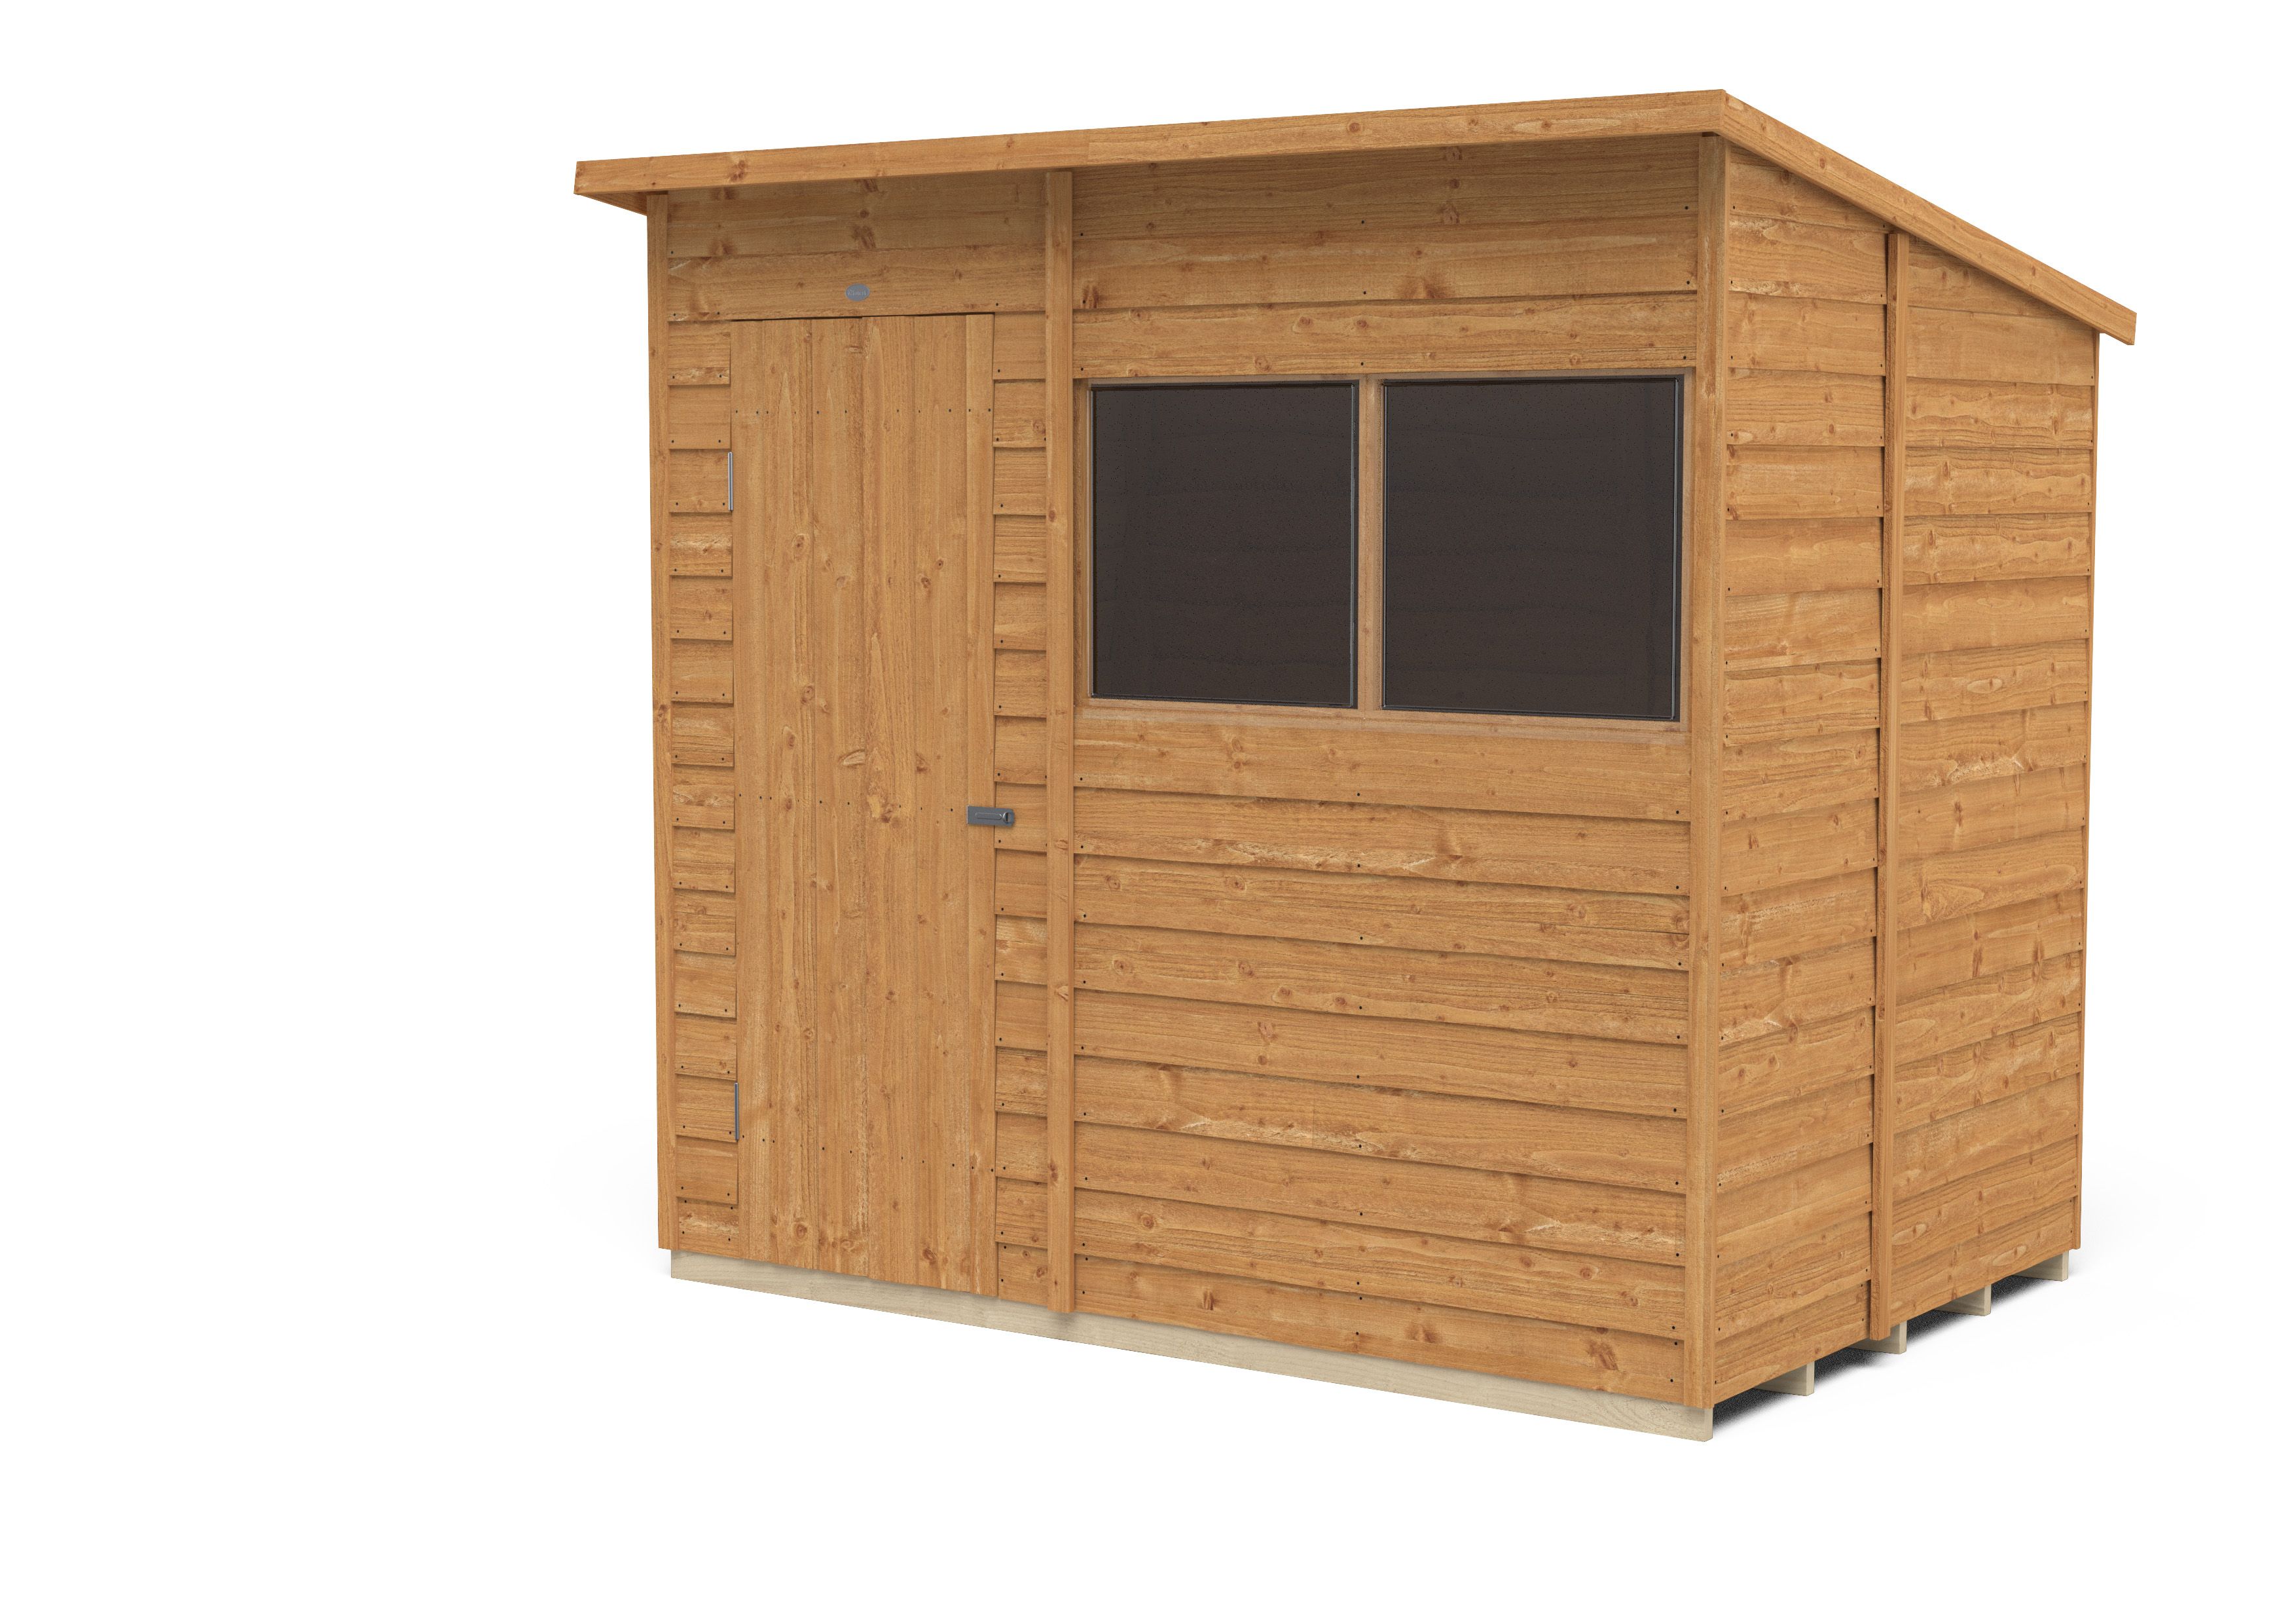 Forest Garden Overlap 7x5 ft Pent Wooden Dip treated Shed with floor & 2 windows (Base included) - Assembly service included